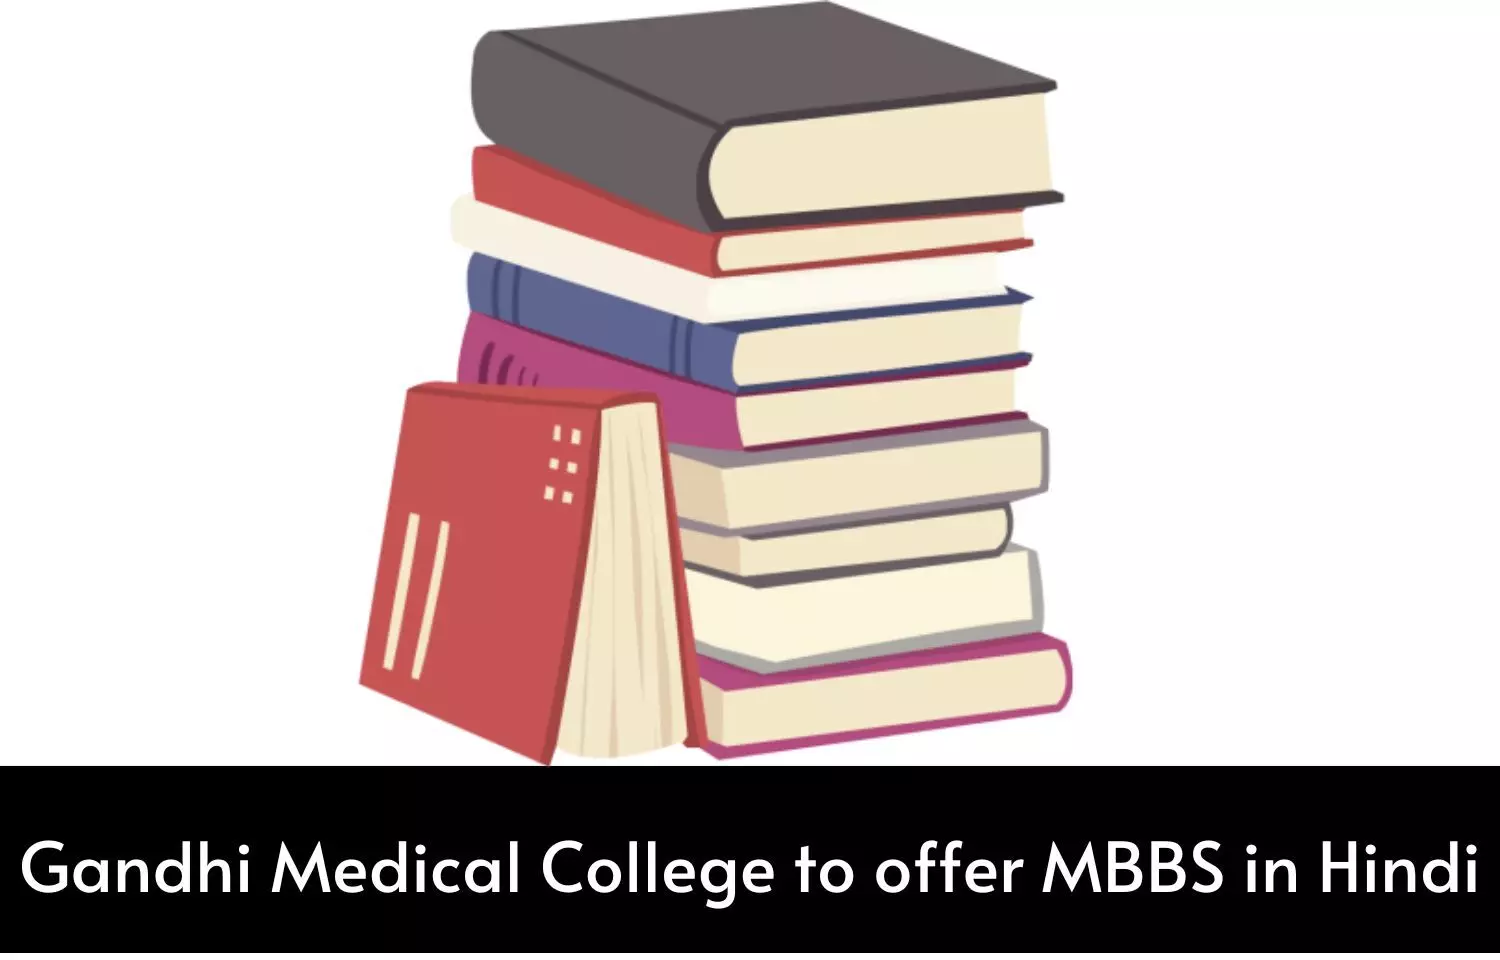 Gandhi Medical College to offer MBBS in Hindi